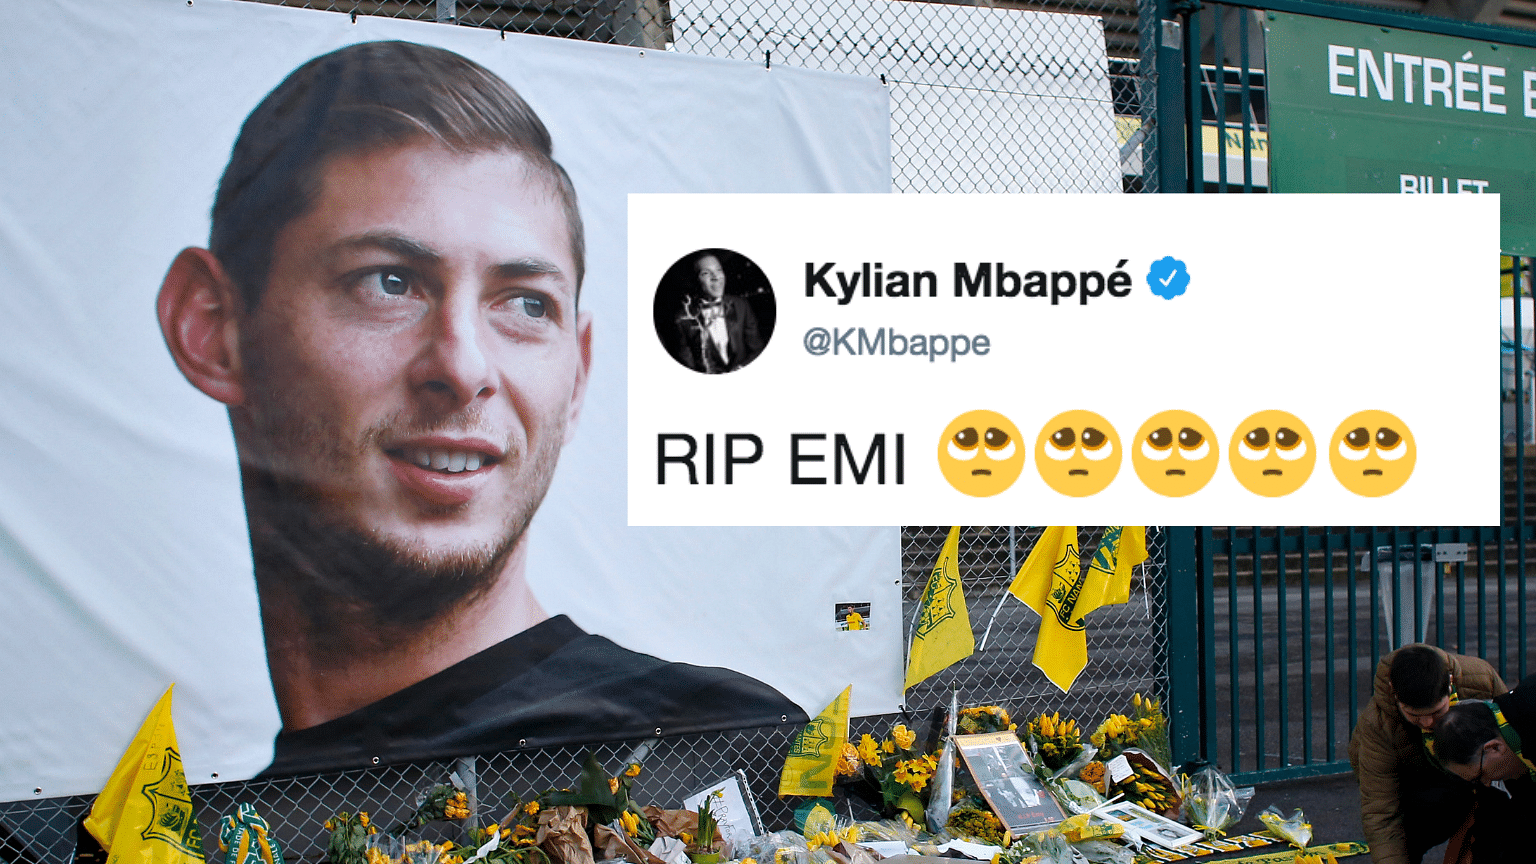 Police confirmed that the body recovered from the wreckage was of Argentine soccer player Emiliano Sala.